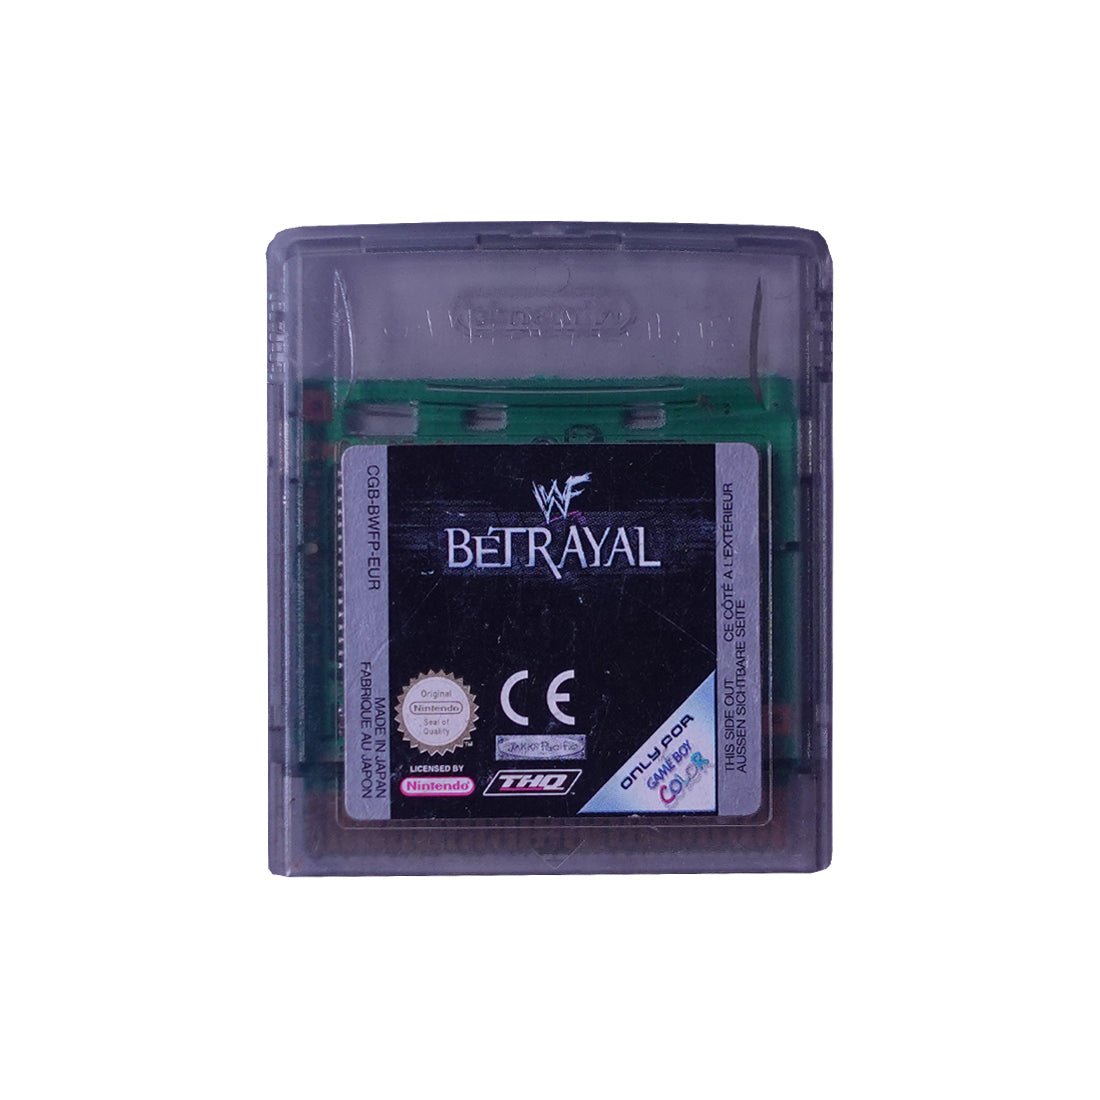 (Pre-Owned) Betrayal - Gameboy Color - ريترو - Store 974 | ستور ٩٧٤